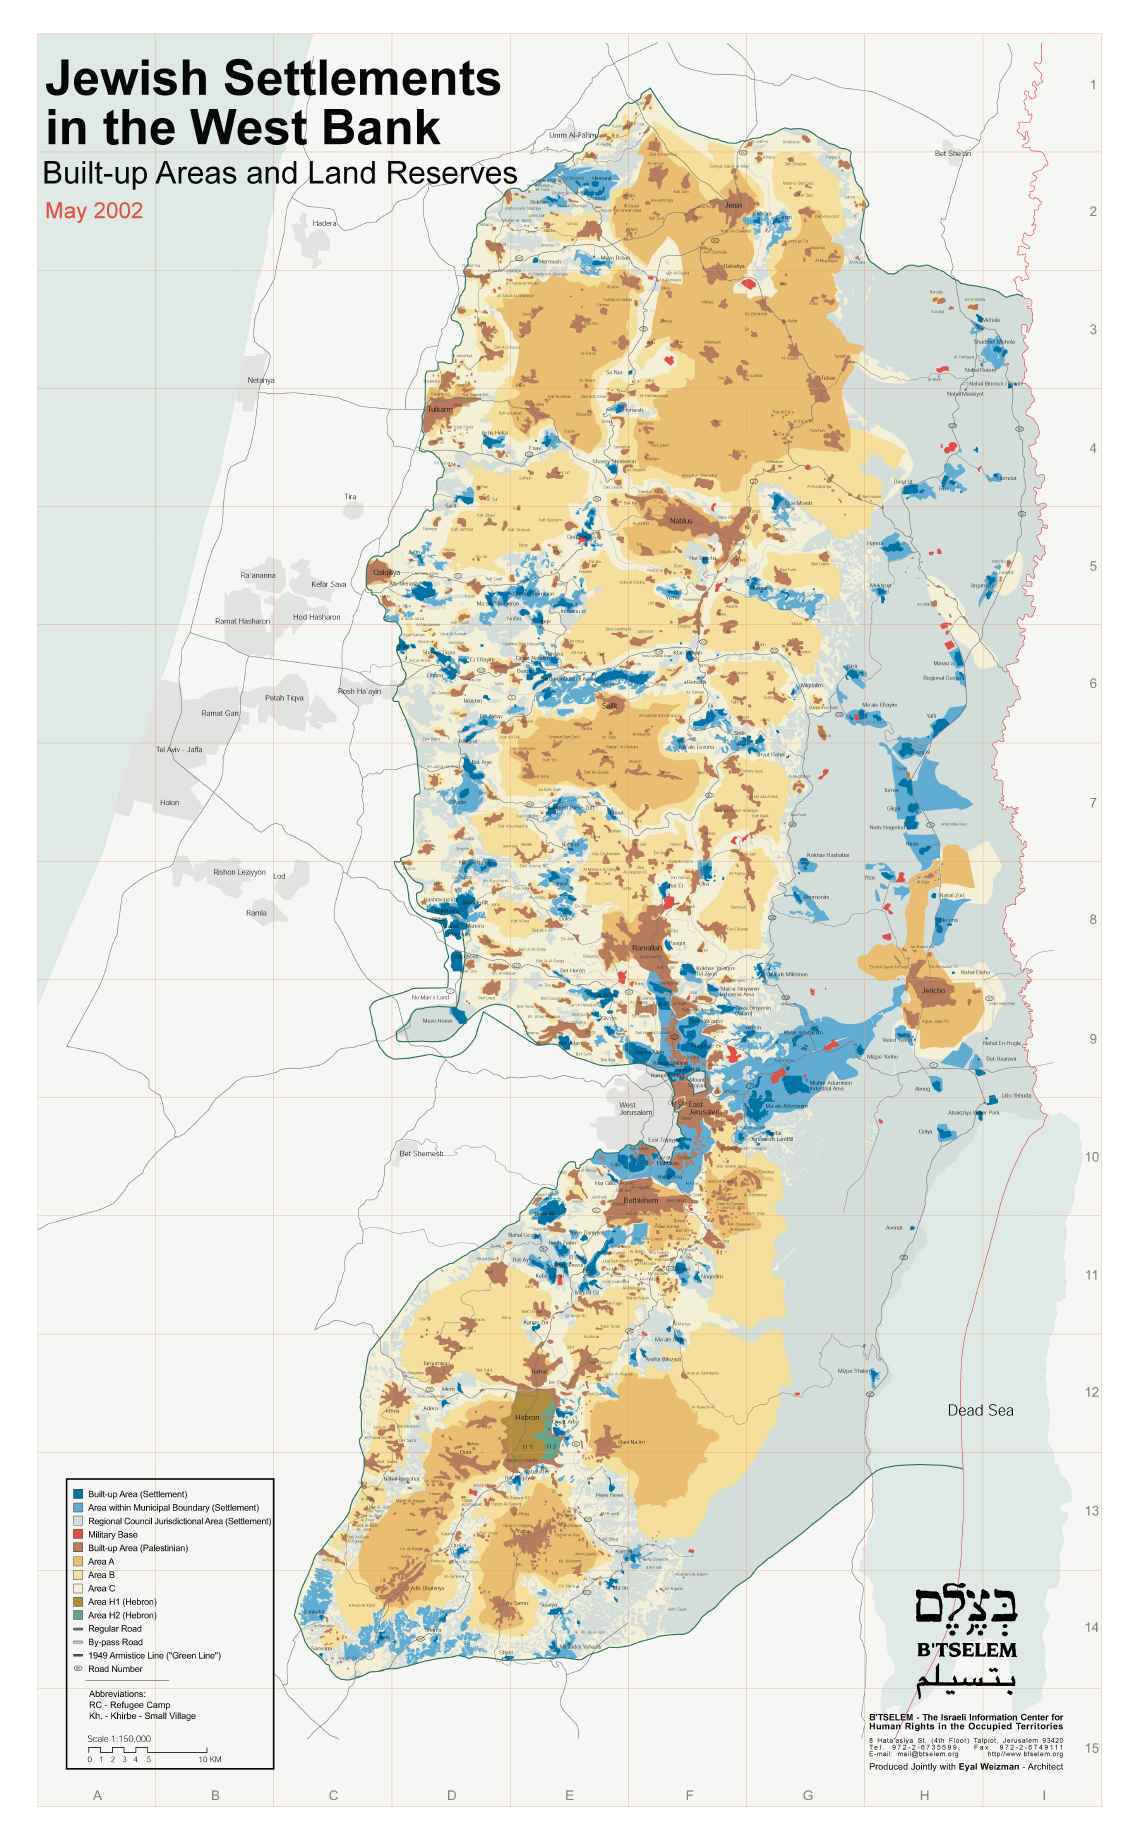 Jewish Settlements in the West Bank - click for larger image